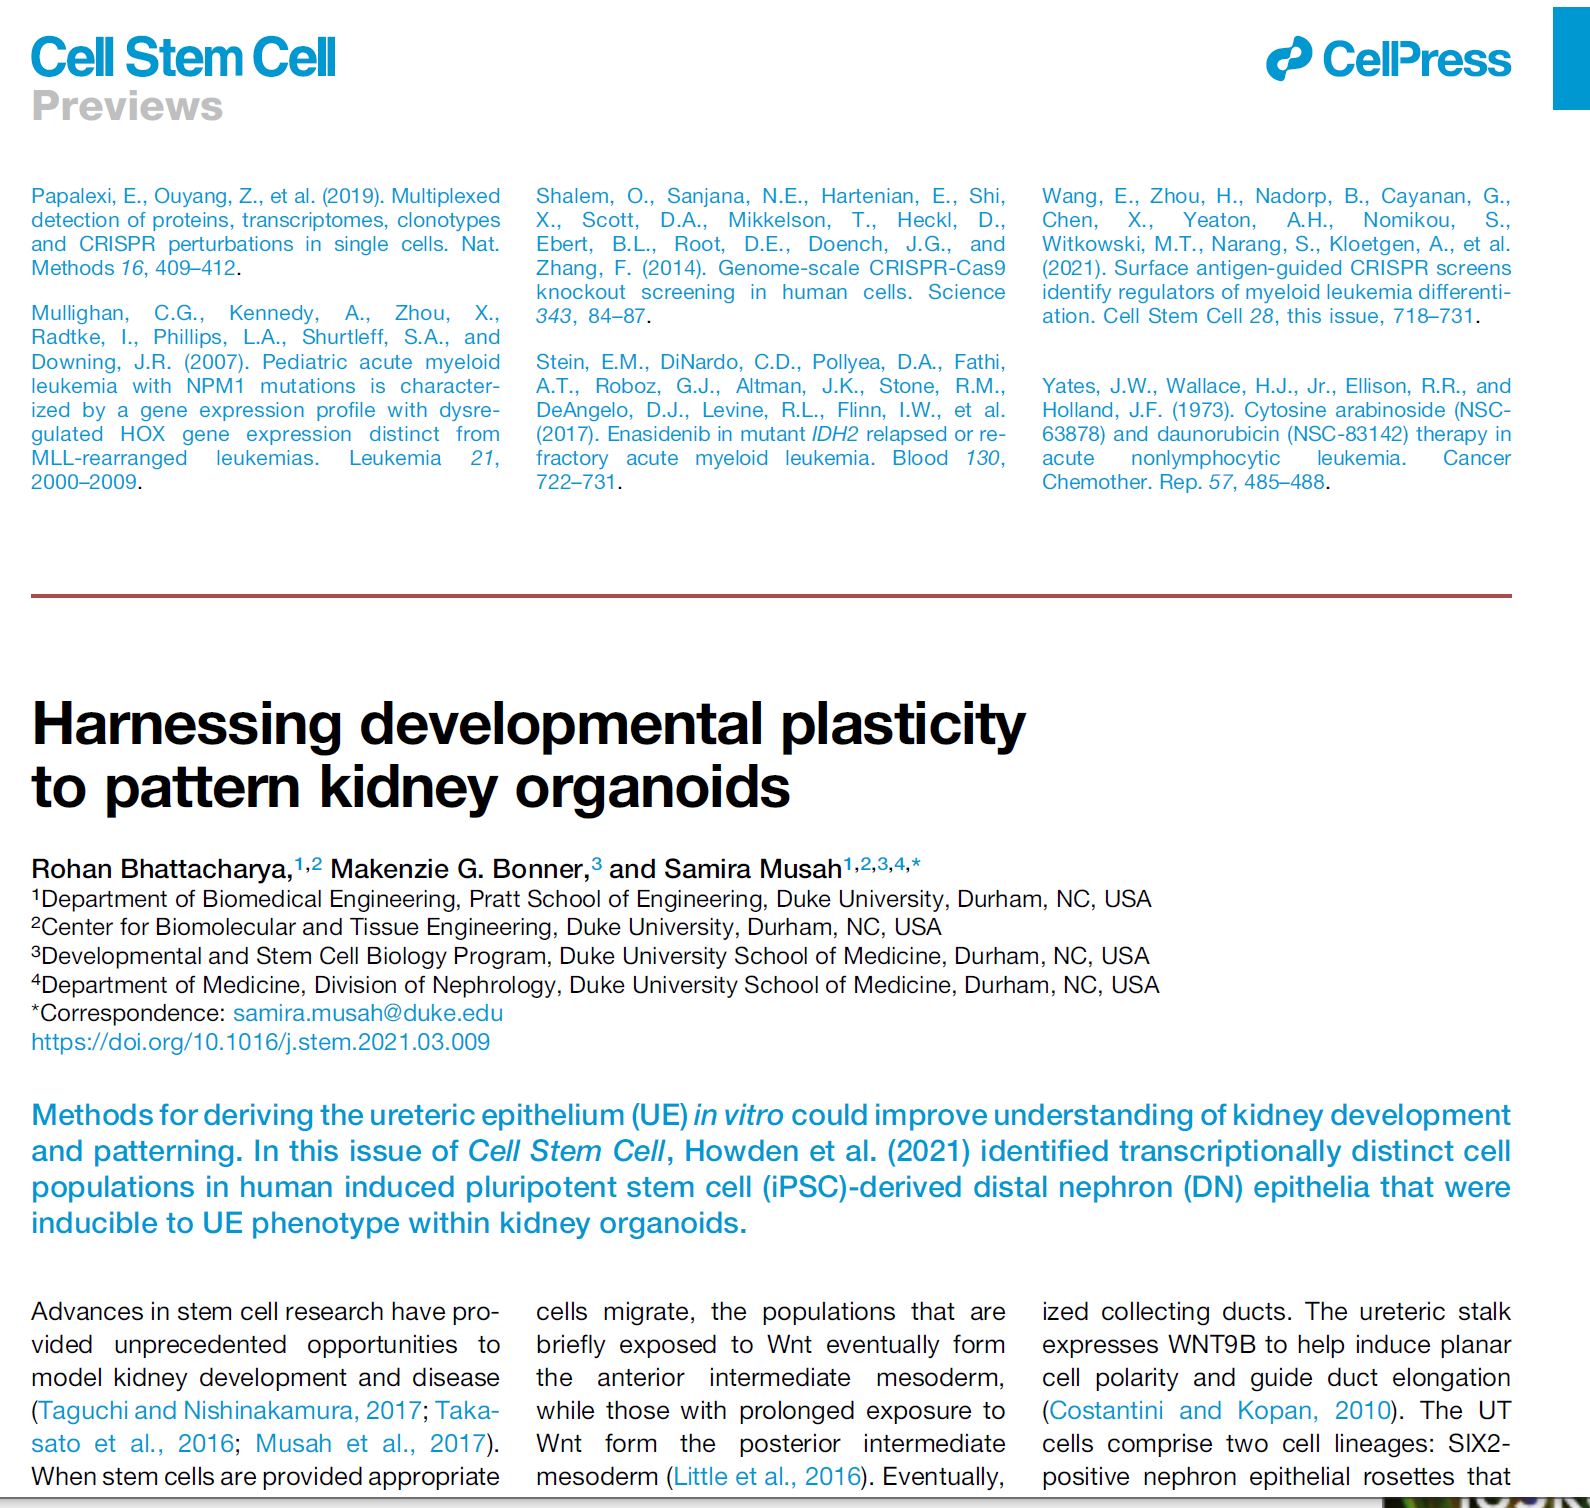 Musah Lab At Duke University Check Out Our Preview Paper On Harnessing Developmental Plasticityy To Pattern Kidney Organoids Published In Cell Stem Cell Musahlab Rohanbme Makenziebonner Profsamiramusah Dukeengineering Dukekidney